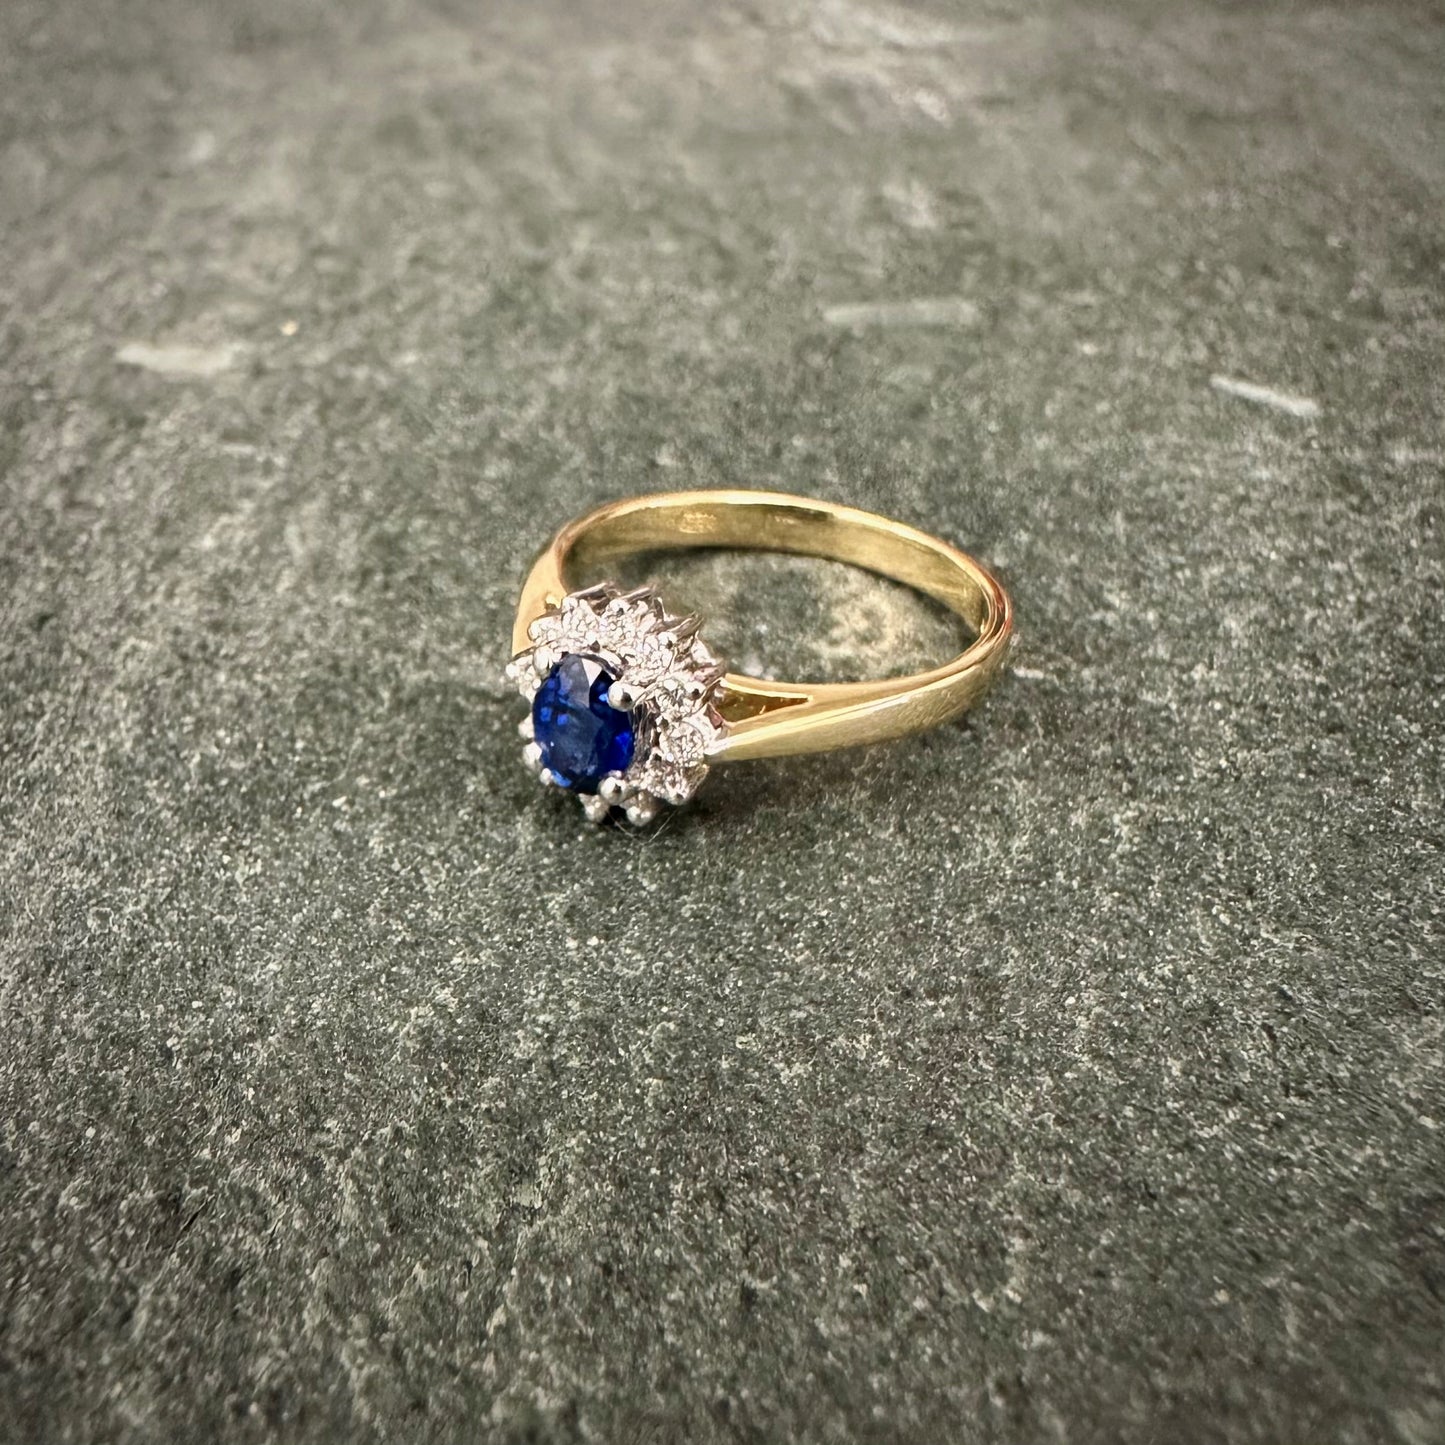 Pre Owned: 18ct gold oval sapphire and brilliant cut diamond cluster ring.  - 0.45ct